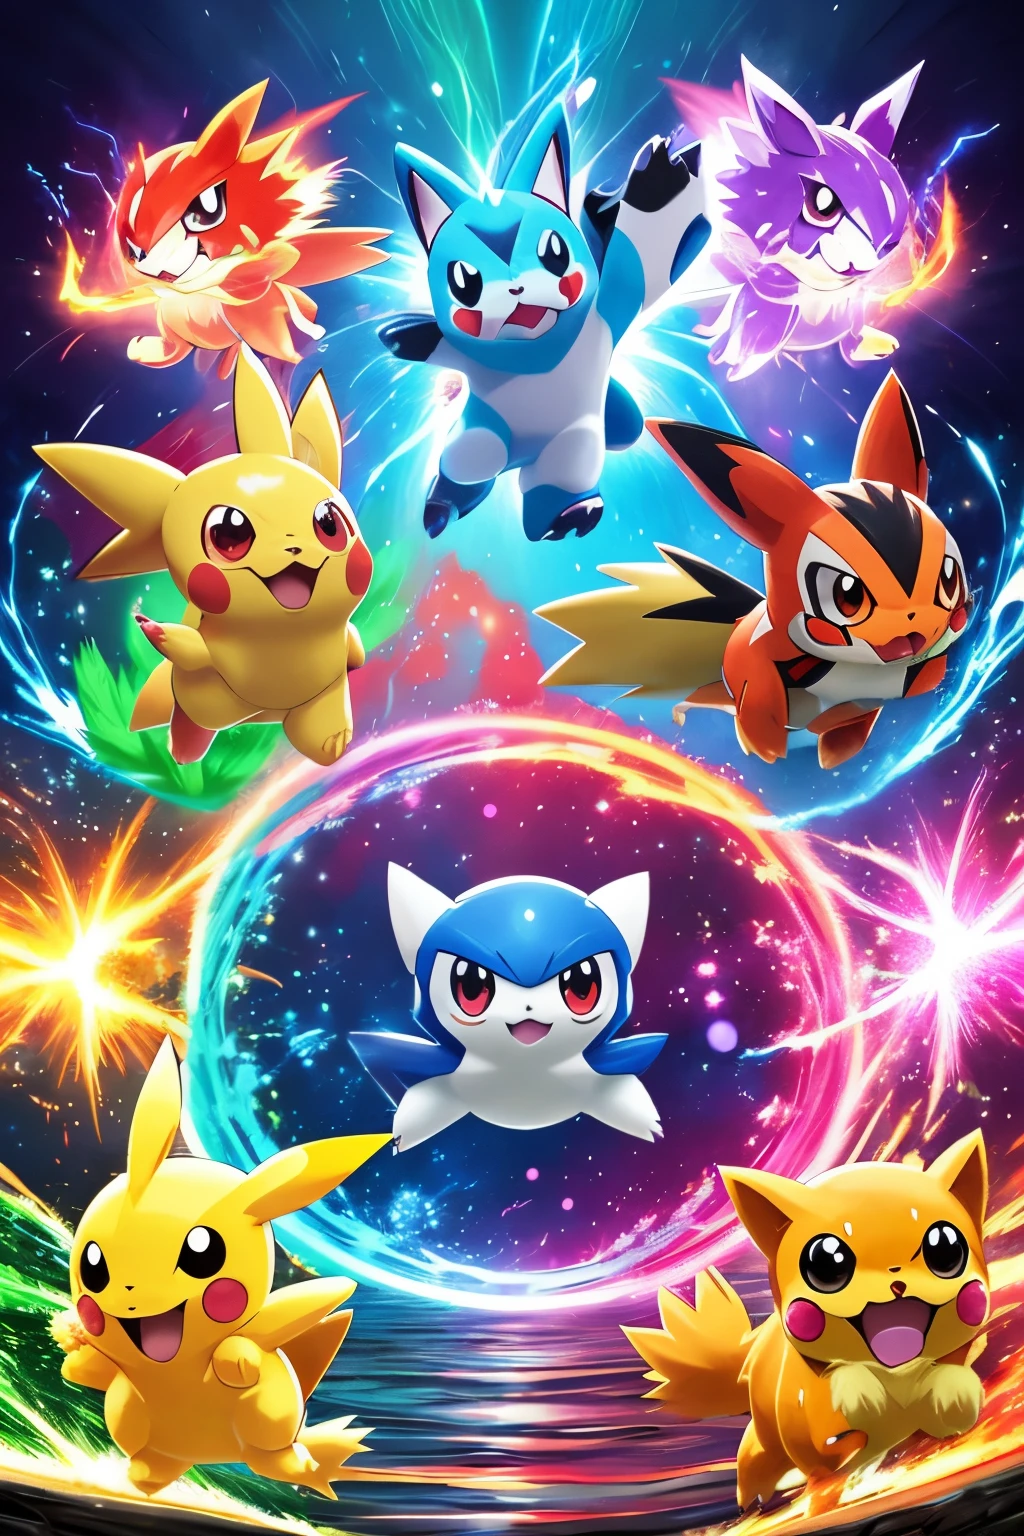 highres,ultra-detailed,pokemon characters,colorful,animestyle:1.1,intense battle scene,multiple characters in action,dynamic poses,vivid colors,sharp focus.brilliant lighting,electrifying effects,thunderbolts and lightning,roaring fire,fluttering leaves,rippling water,bubble attacks,torrential rain,crackling energy,floating energy orbs,lively expressions,chasing and dodging,throwing pokeballs,collecting badges,friendly rivalries,adventure across regions,magical creatures,fantastical landscapes,journey of friendship and growth.